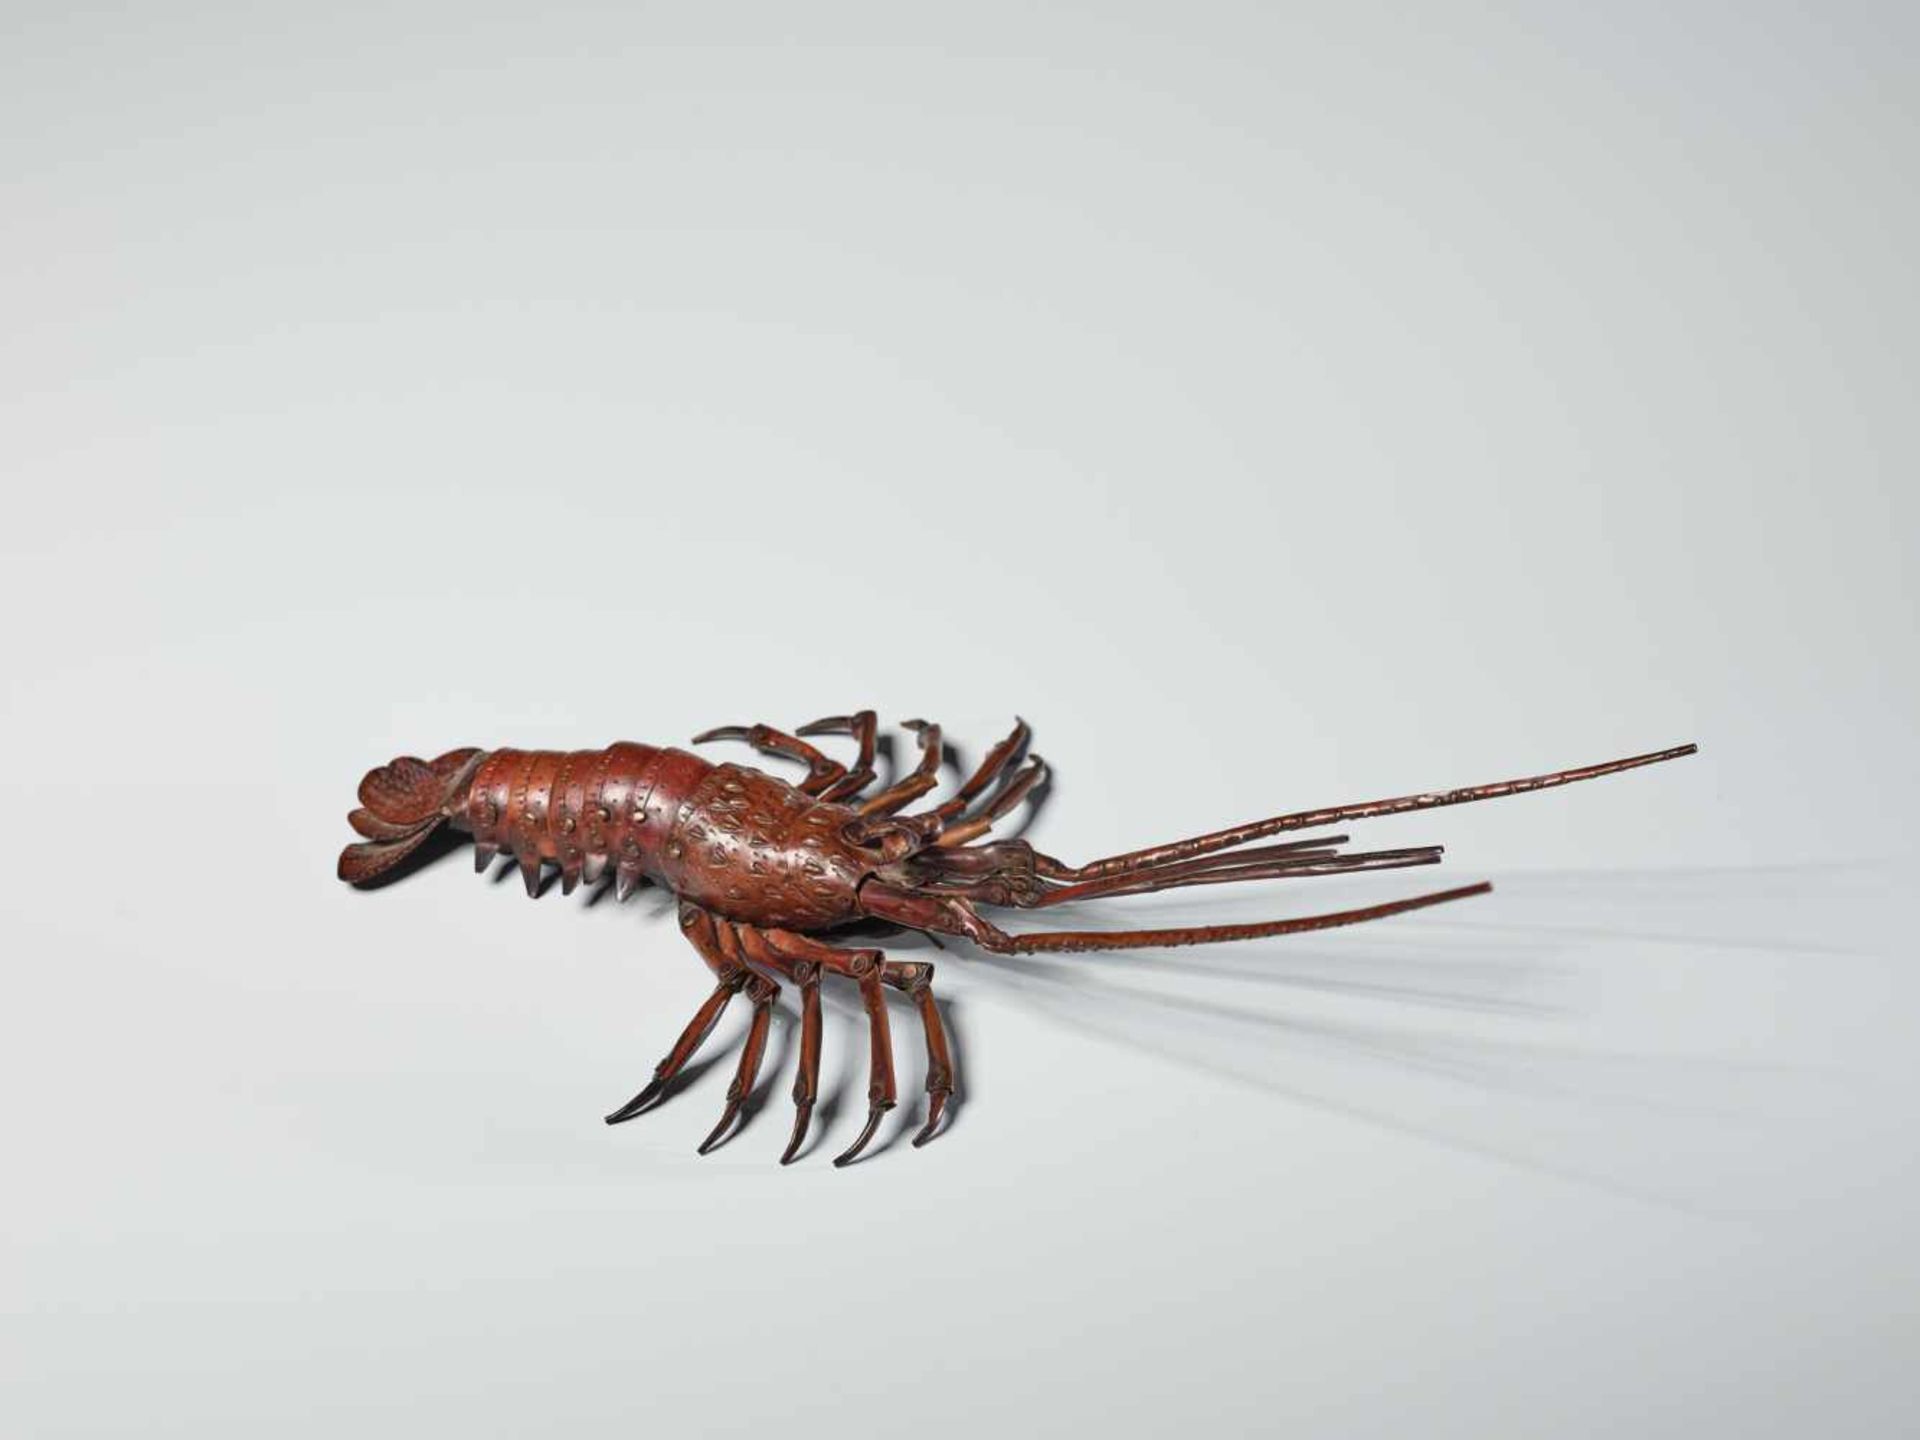 A PAIR OF FULLY ARTICULATED JIZAI OKIMONO DEPICTING EBI (SPINY LOBSTER) BY HIROYOSHICopperJapan, - Image 10 of 15